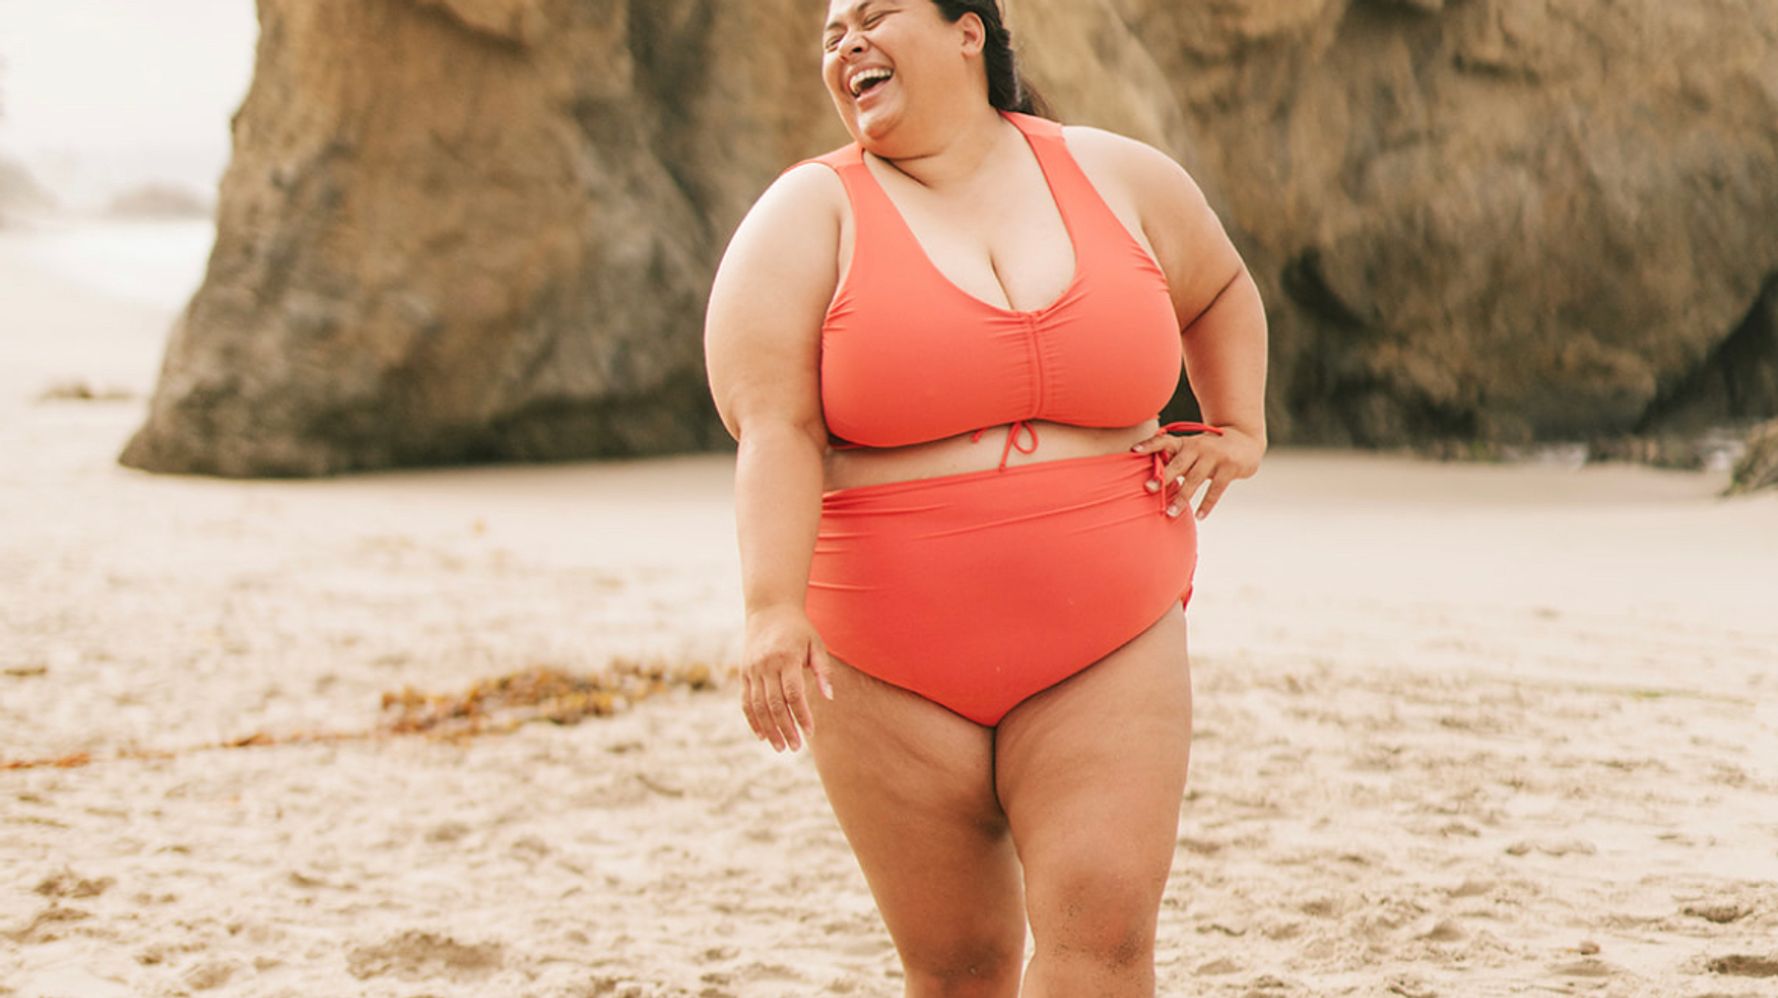 French Nude Beach Mom - I Became A Bikini And Lingerie Model When I Was At My Highest Weight Ever |  HuffPost HuffPost Personal